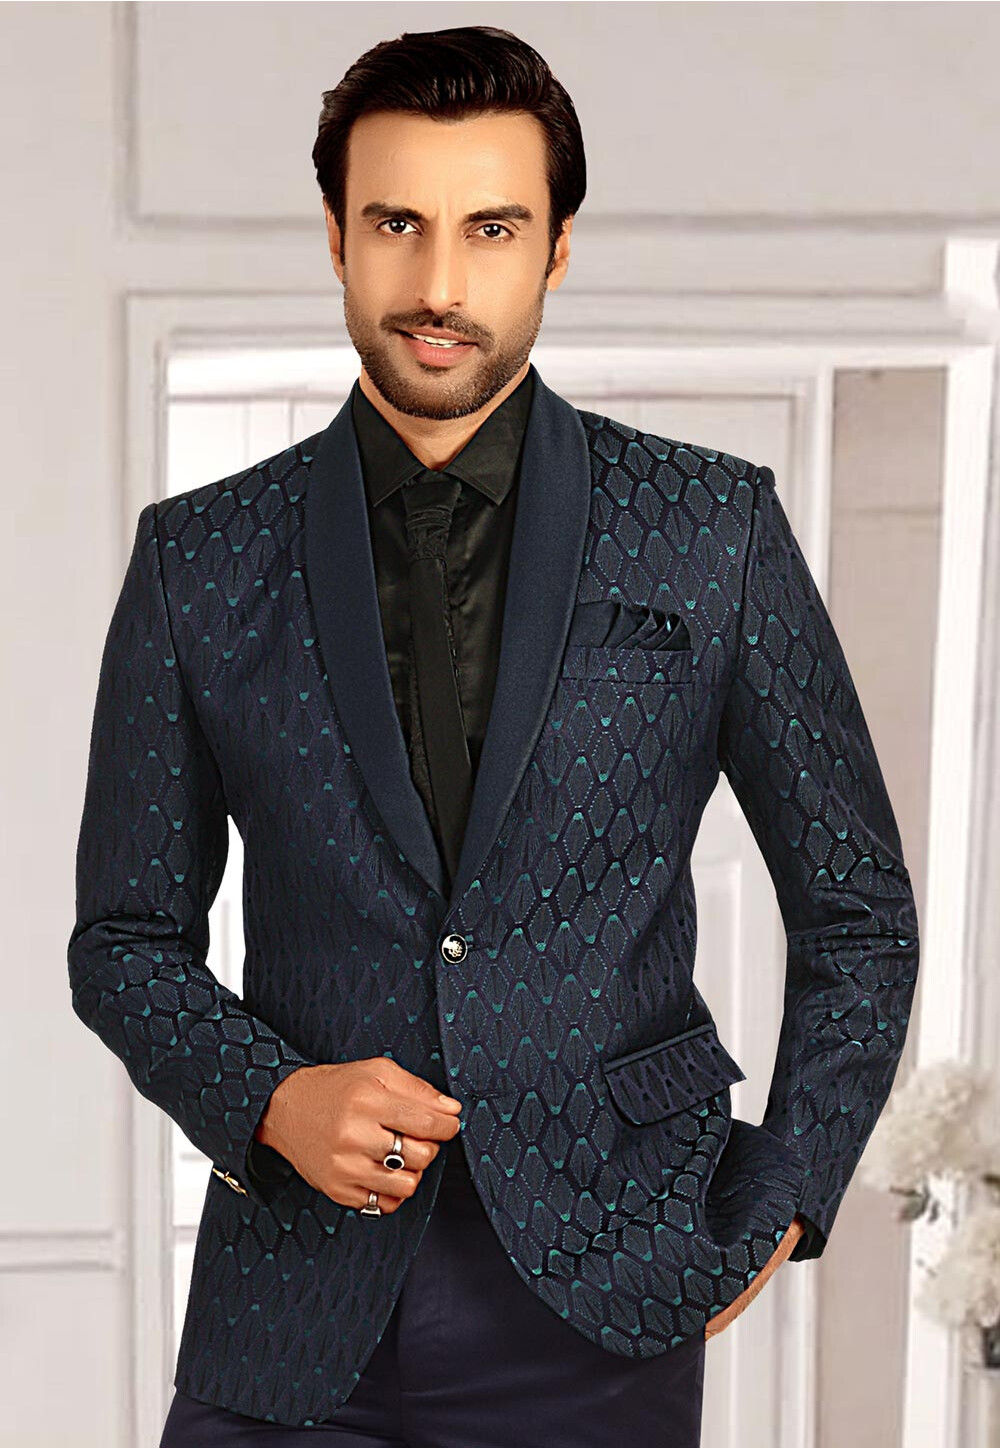 Buy Woven Terry Rayon Jacquard Tuxedo in Teal Blue Online : MHG2533 ...